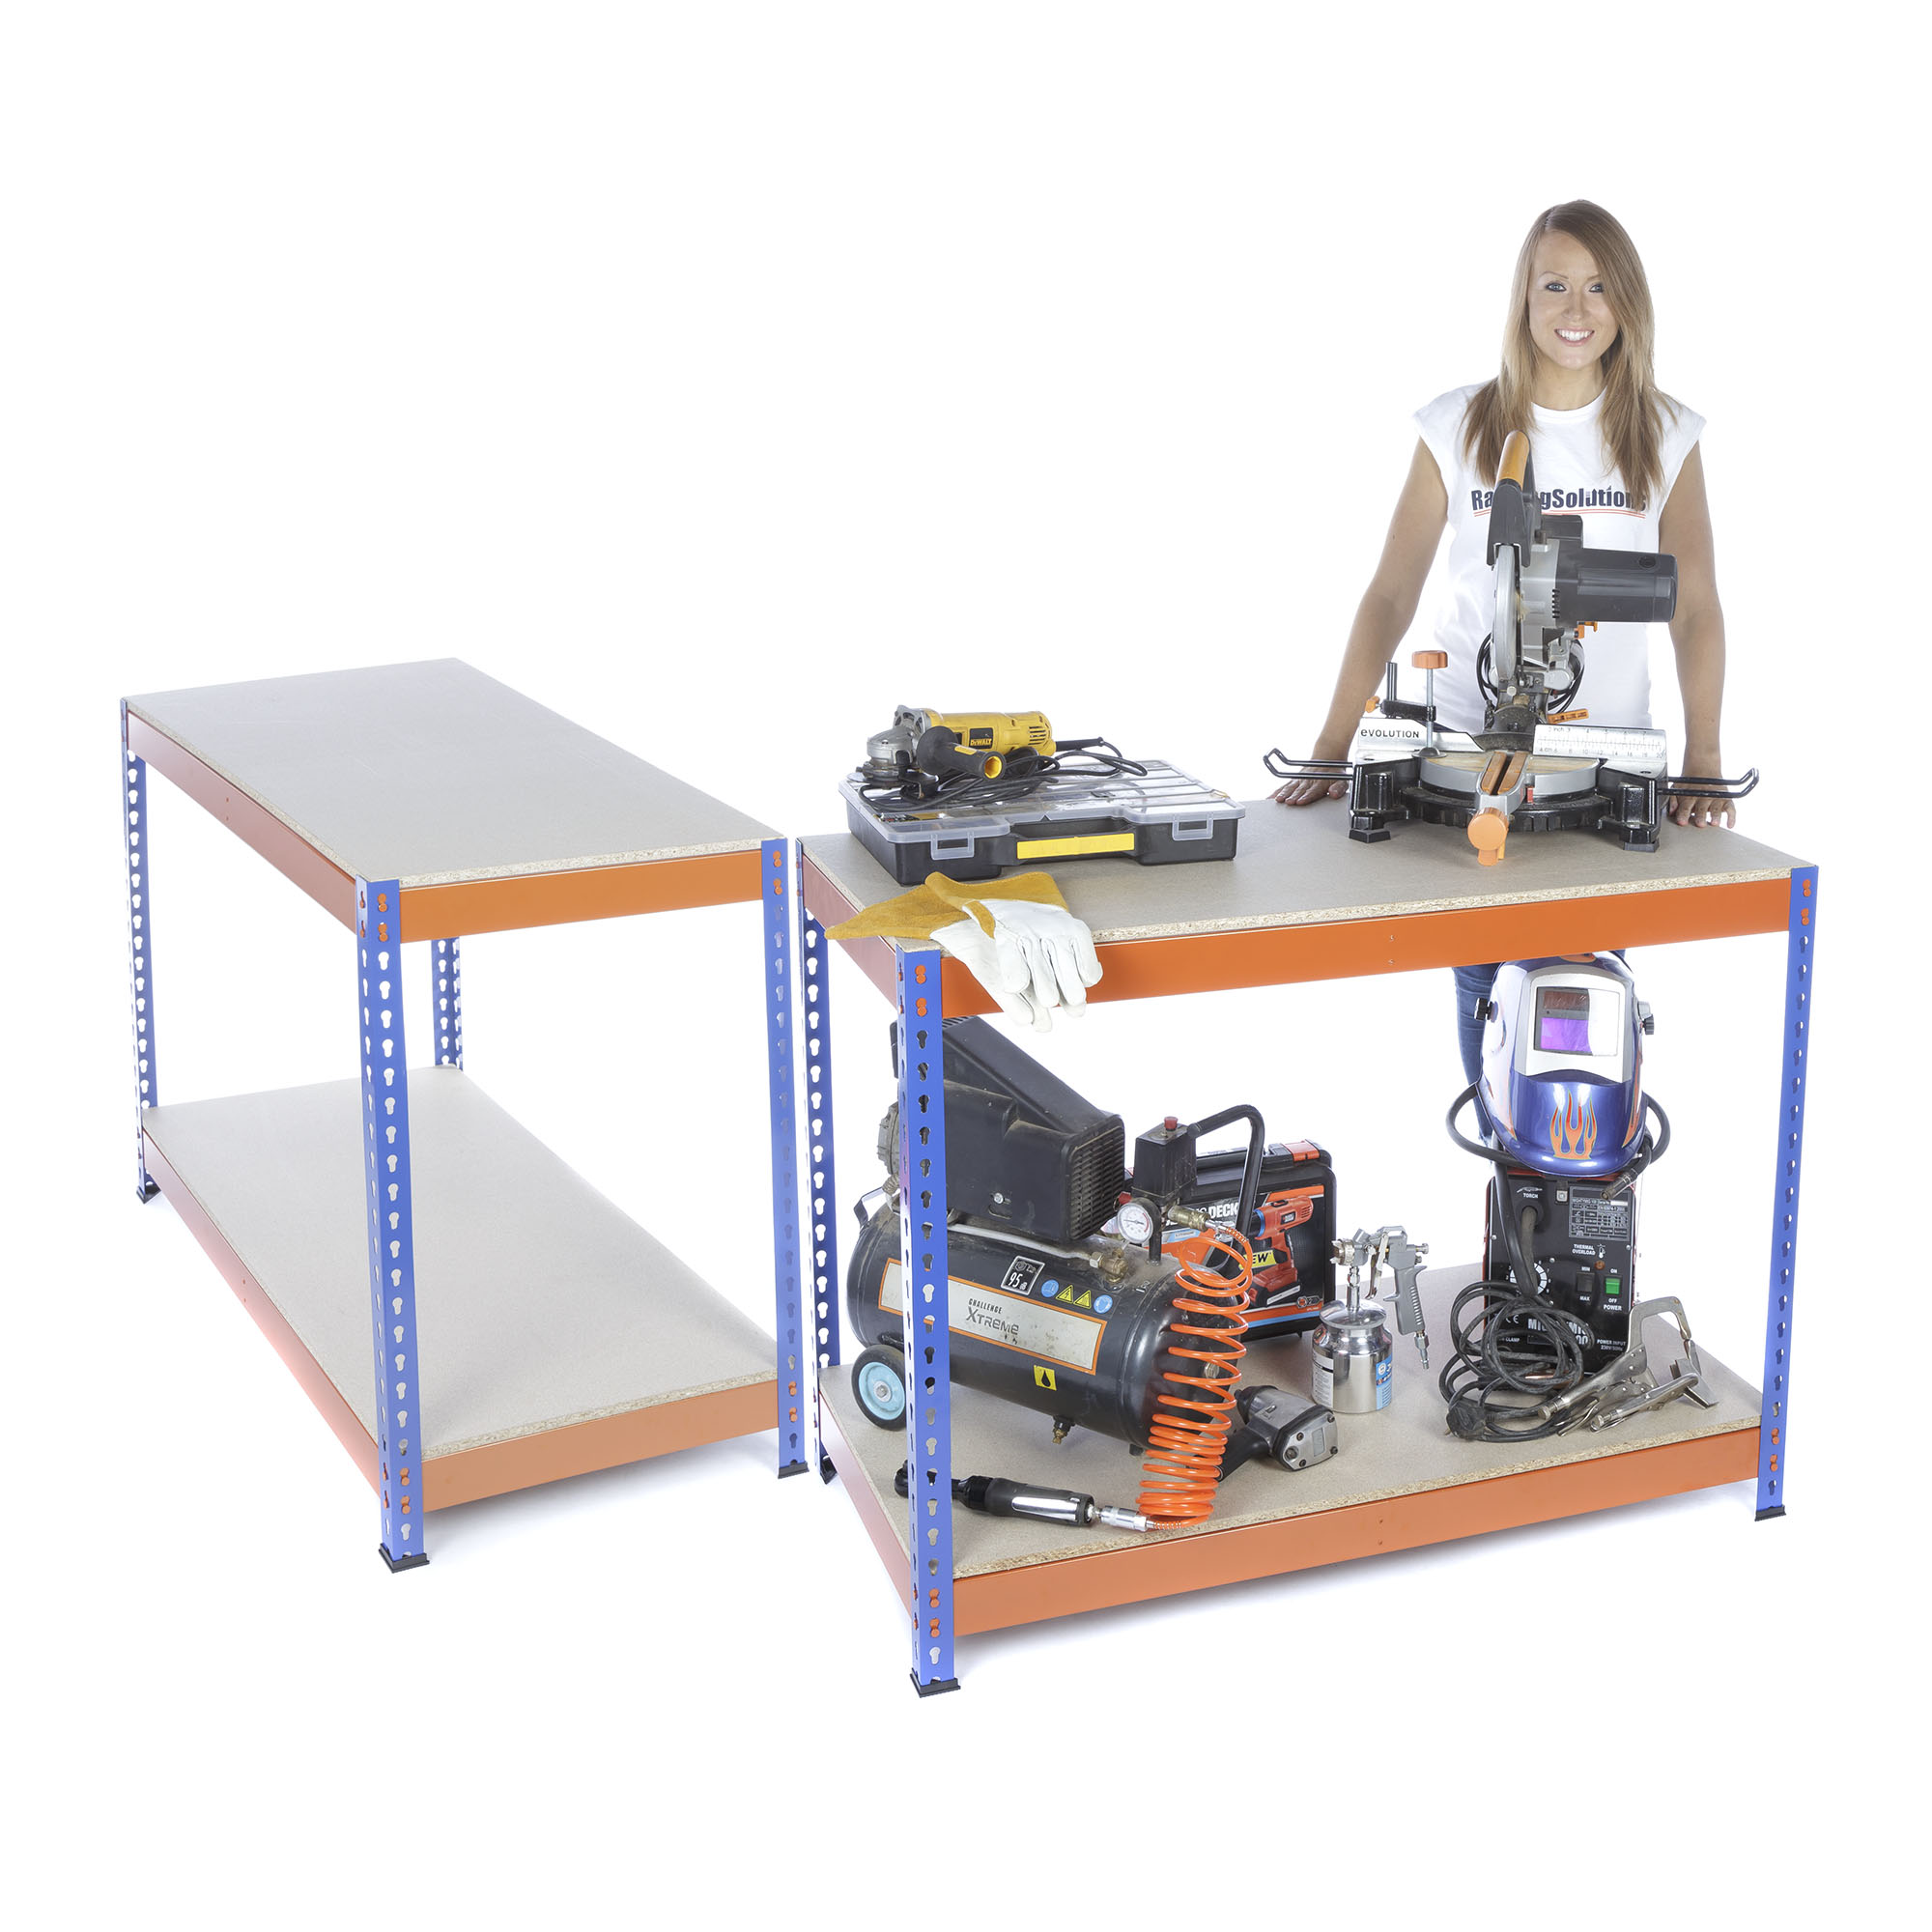 Storage Workbenches for Every Need